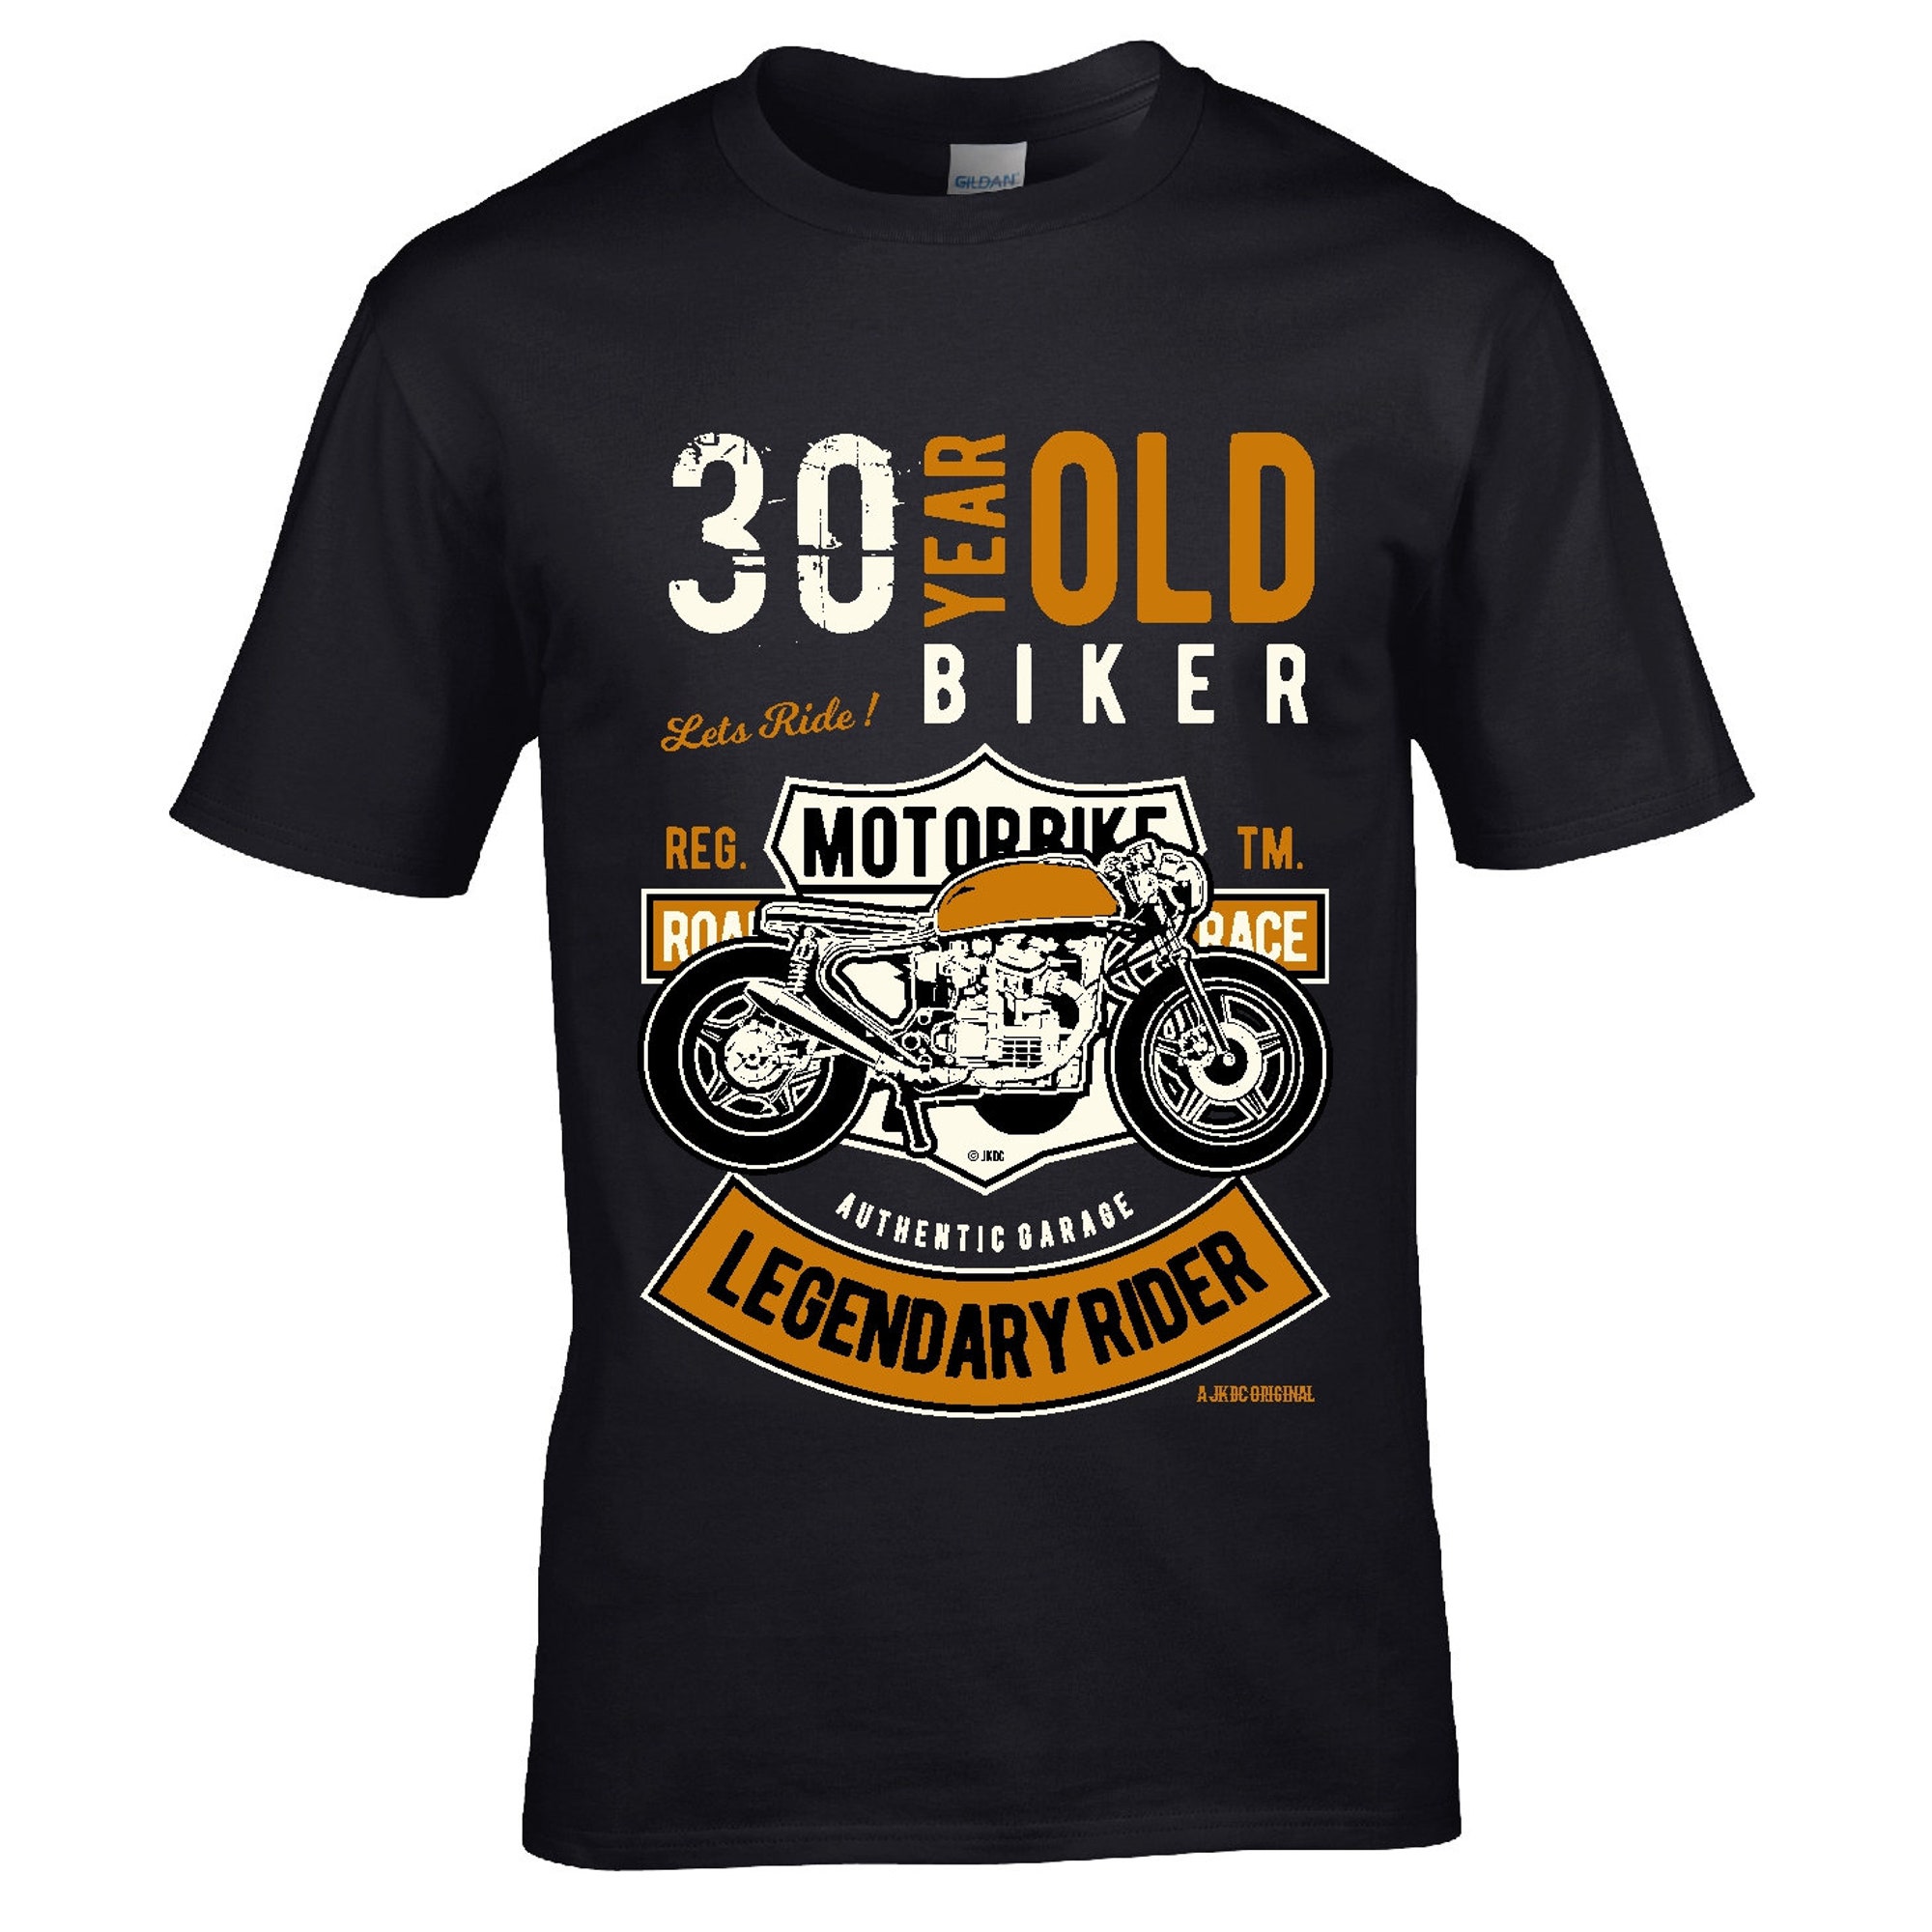 Discover Premium Funny 30 Year Old Biker Legendary Rider Cafe